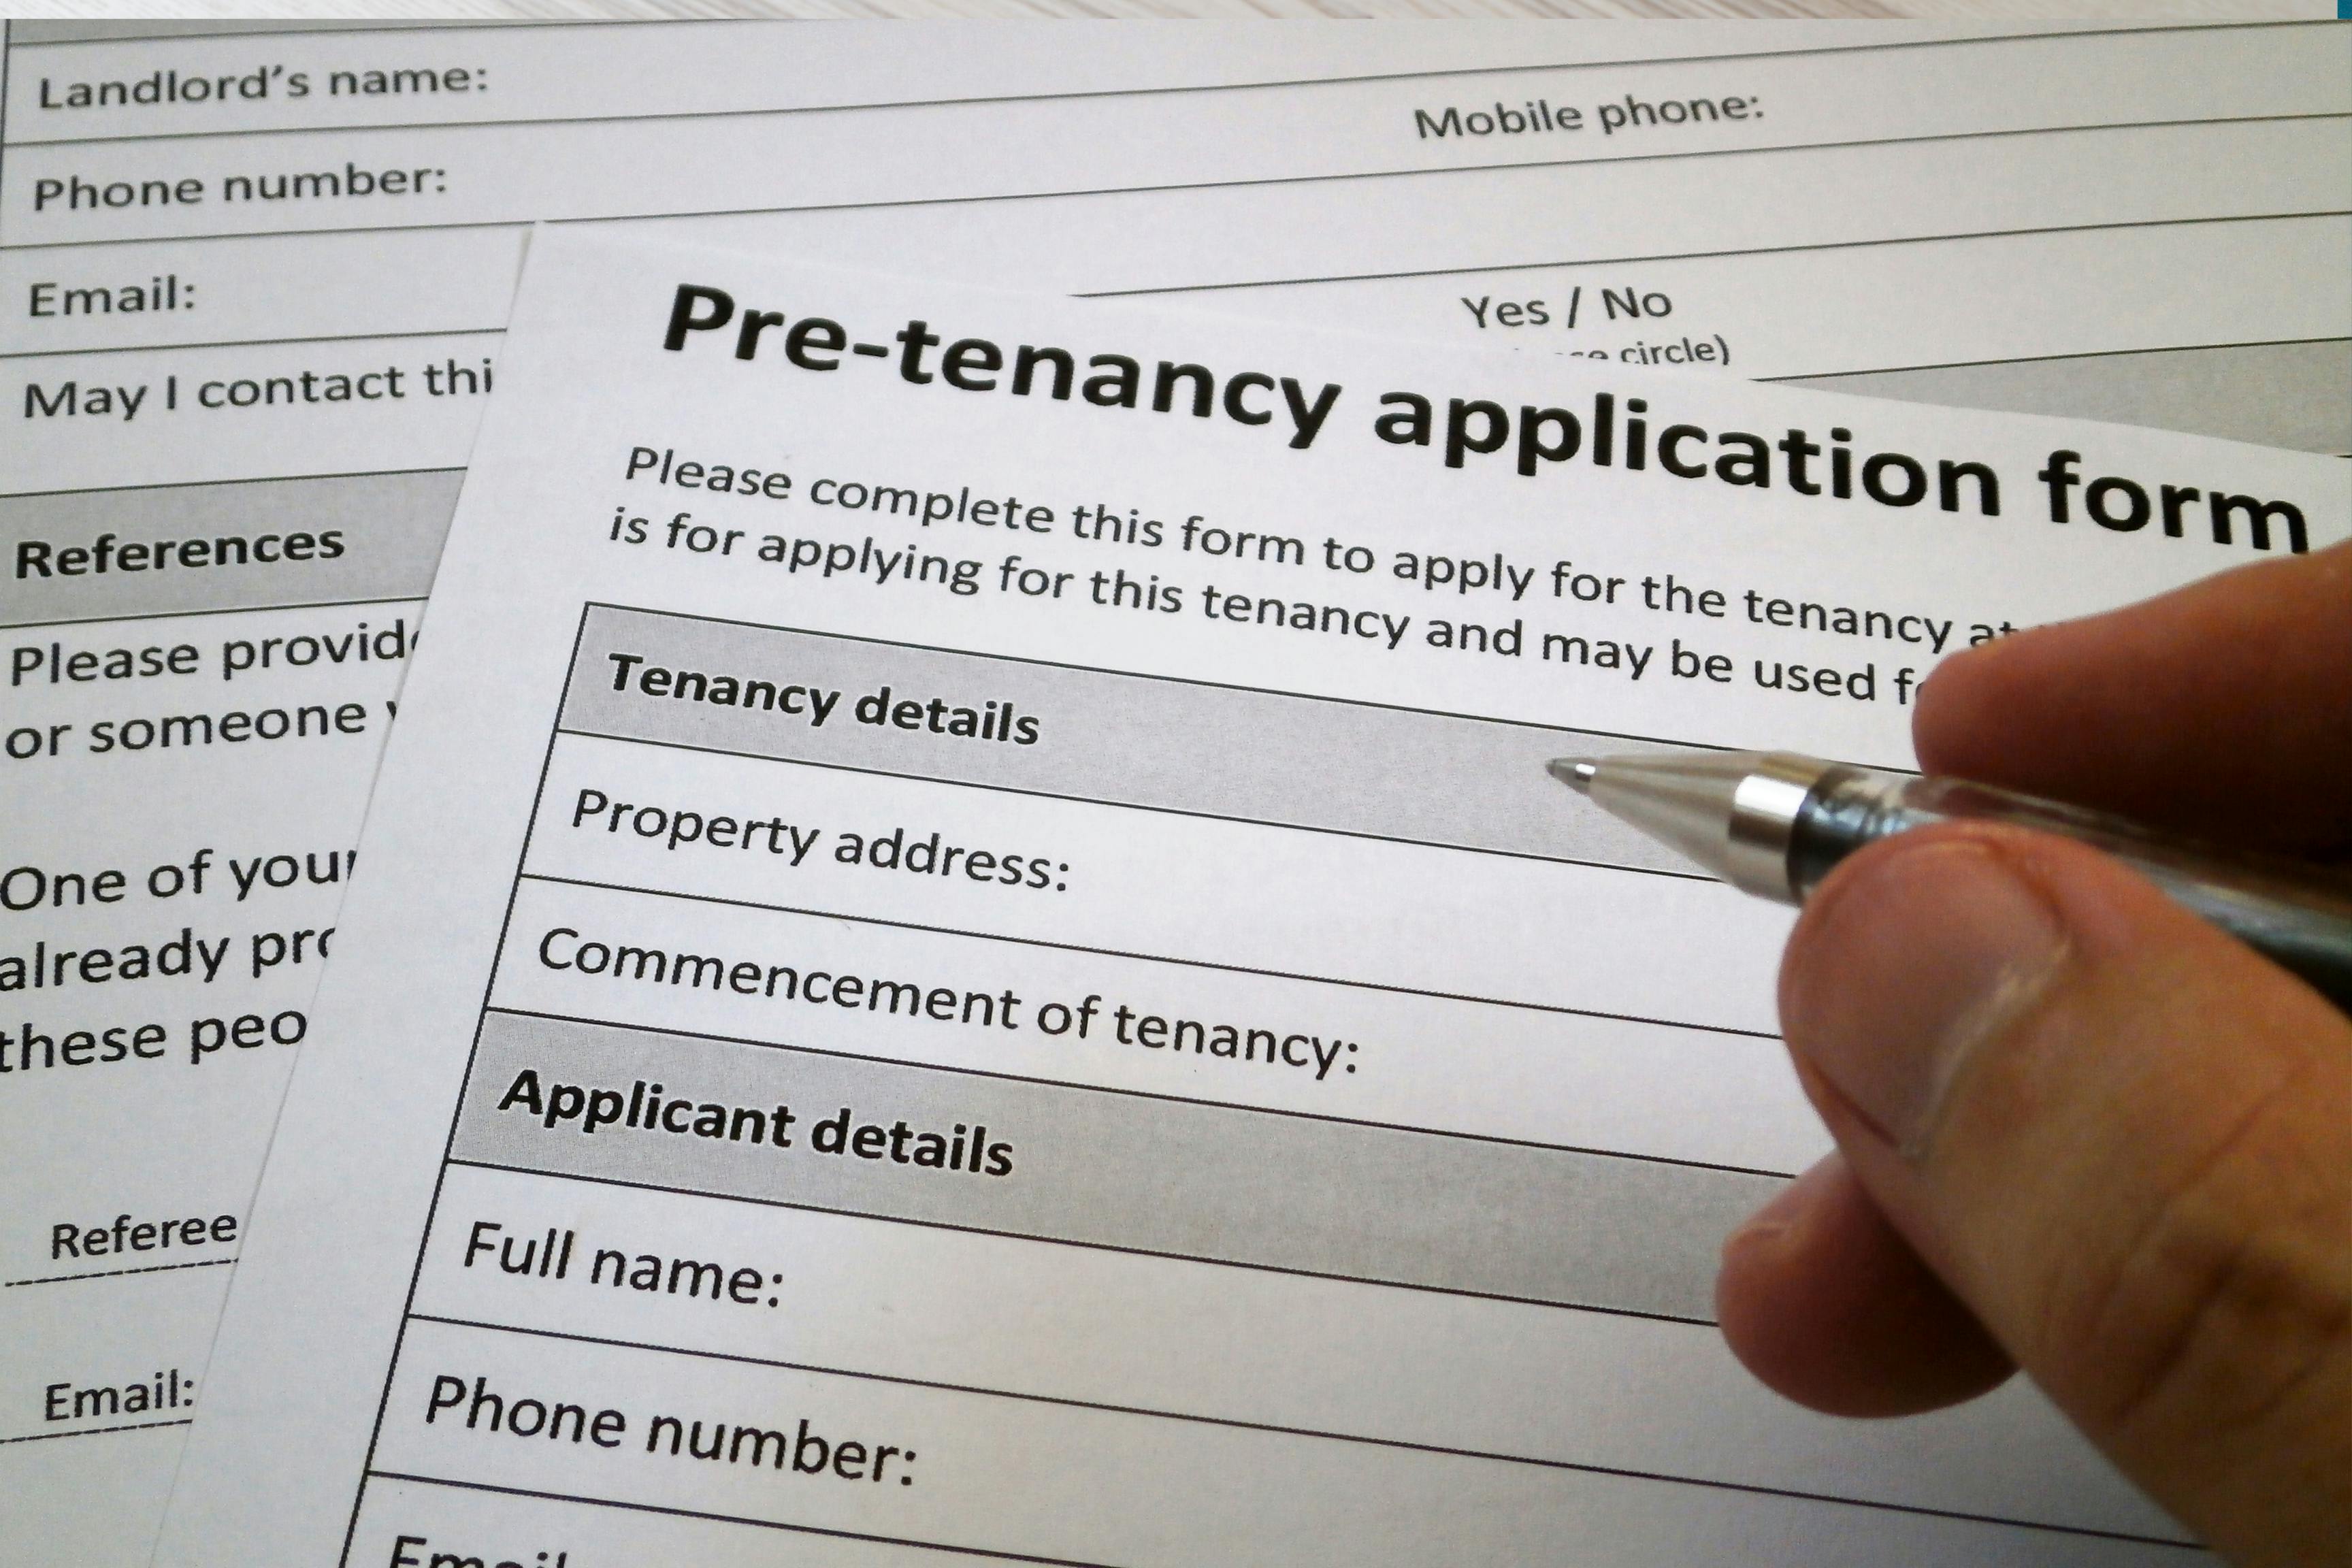 The image shows two forms lying on a desk. On the right side are a man’s fingers holding a pen about to fill out the top form.  The form is titled, Pre-tenancy application form. It asked that the form be completed, with such questions as, Tenancy details, Property address, Full name, Phone number, etc. Underneath this application is another form with questions related to references and landlord information.  The image conveys 5 professional tenants tactics and how to avoid them.